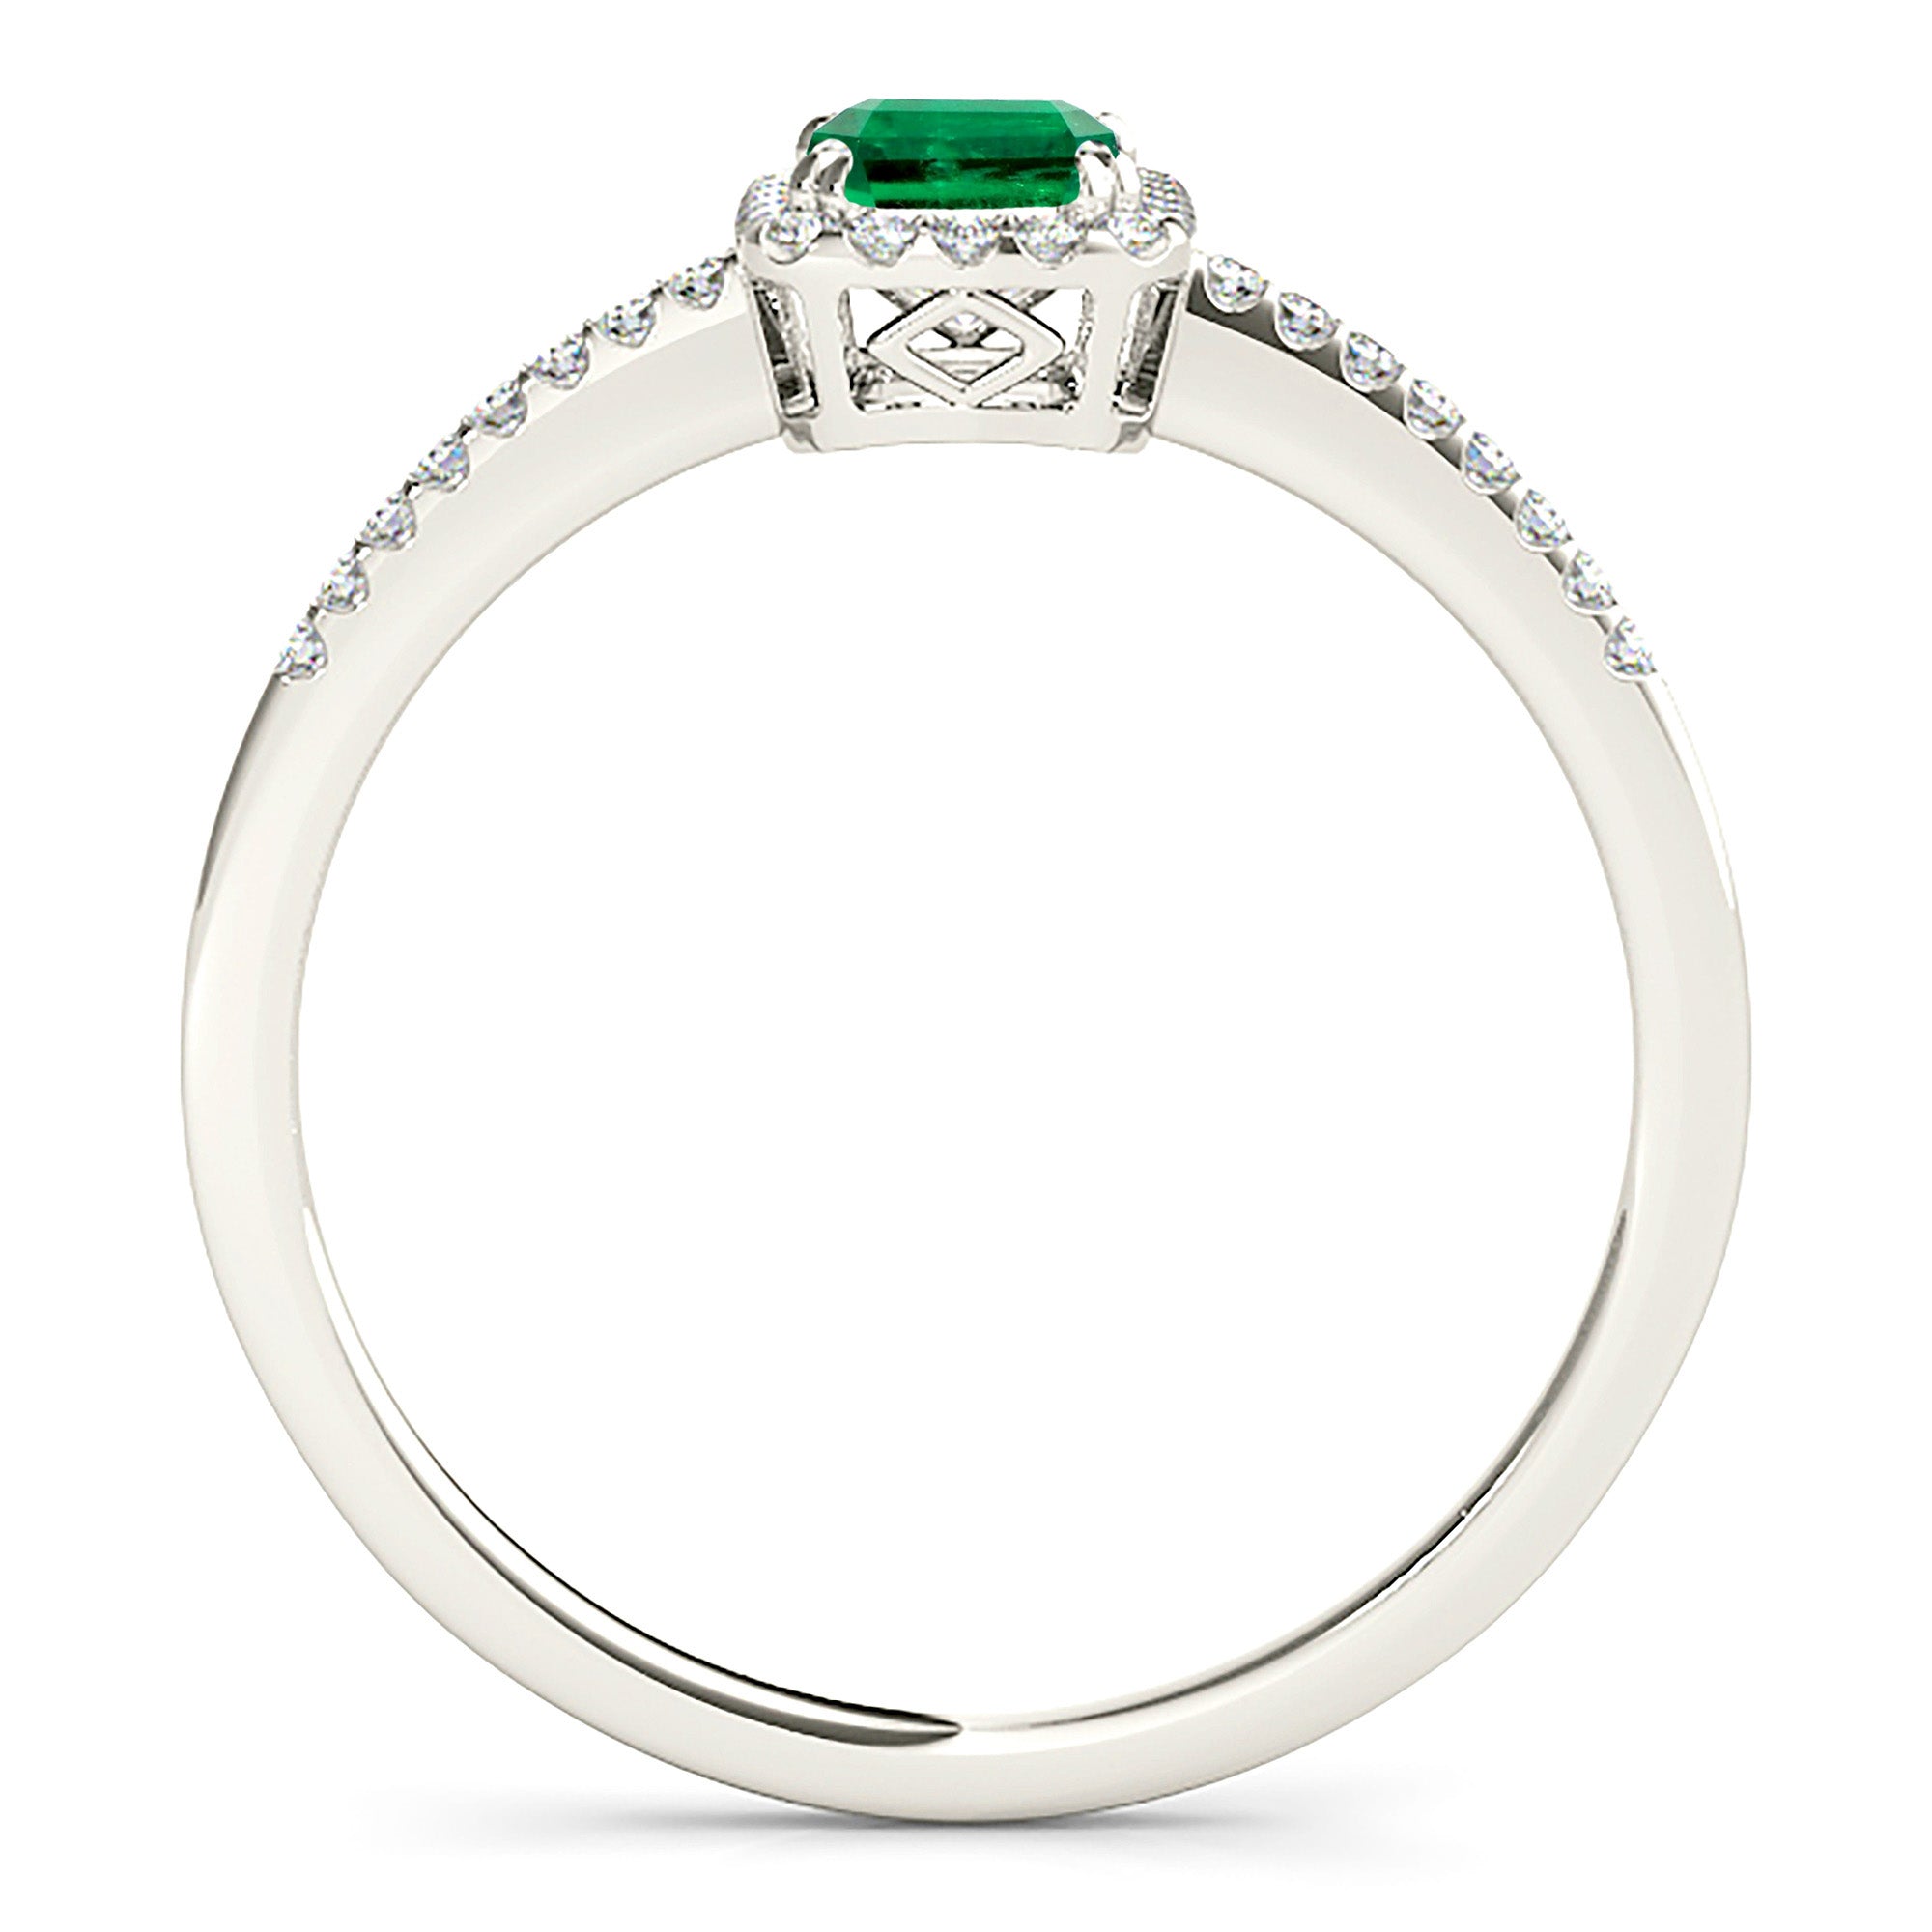 0.65 ct. Genuine Emerald Ring With 0.20 ctw. Diamond Halo and Diamond Delicate Shank-in 14K/18K White, Yellow, Rose Gold and Platinum - Christmas Jewelry Gift -VIRABYANI